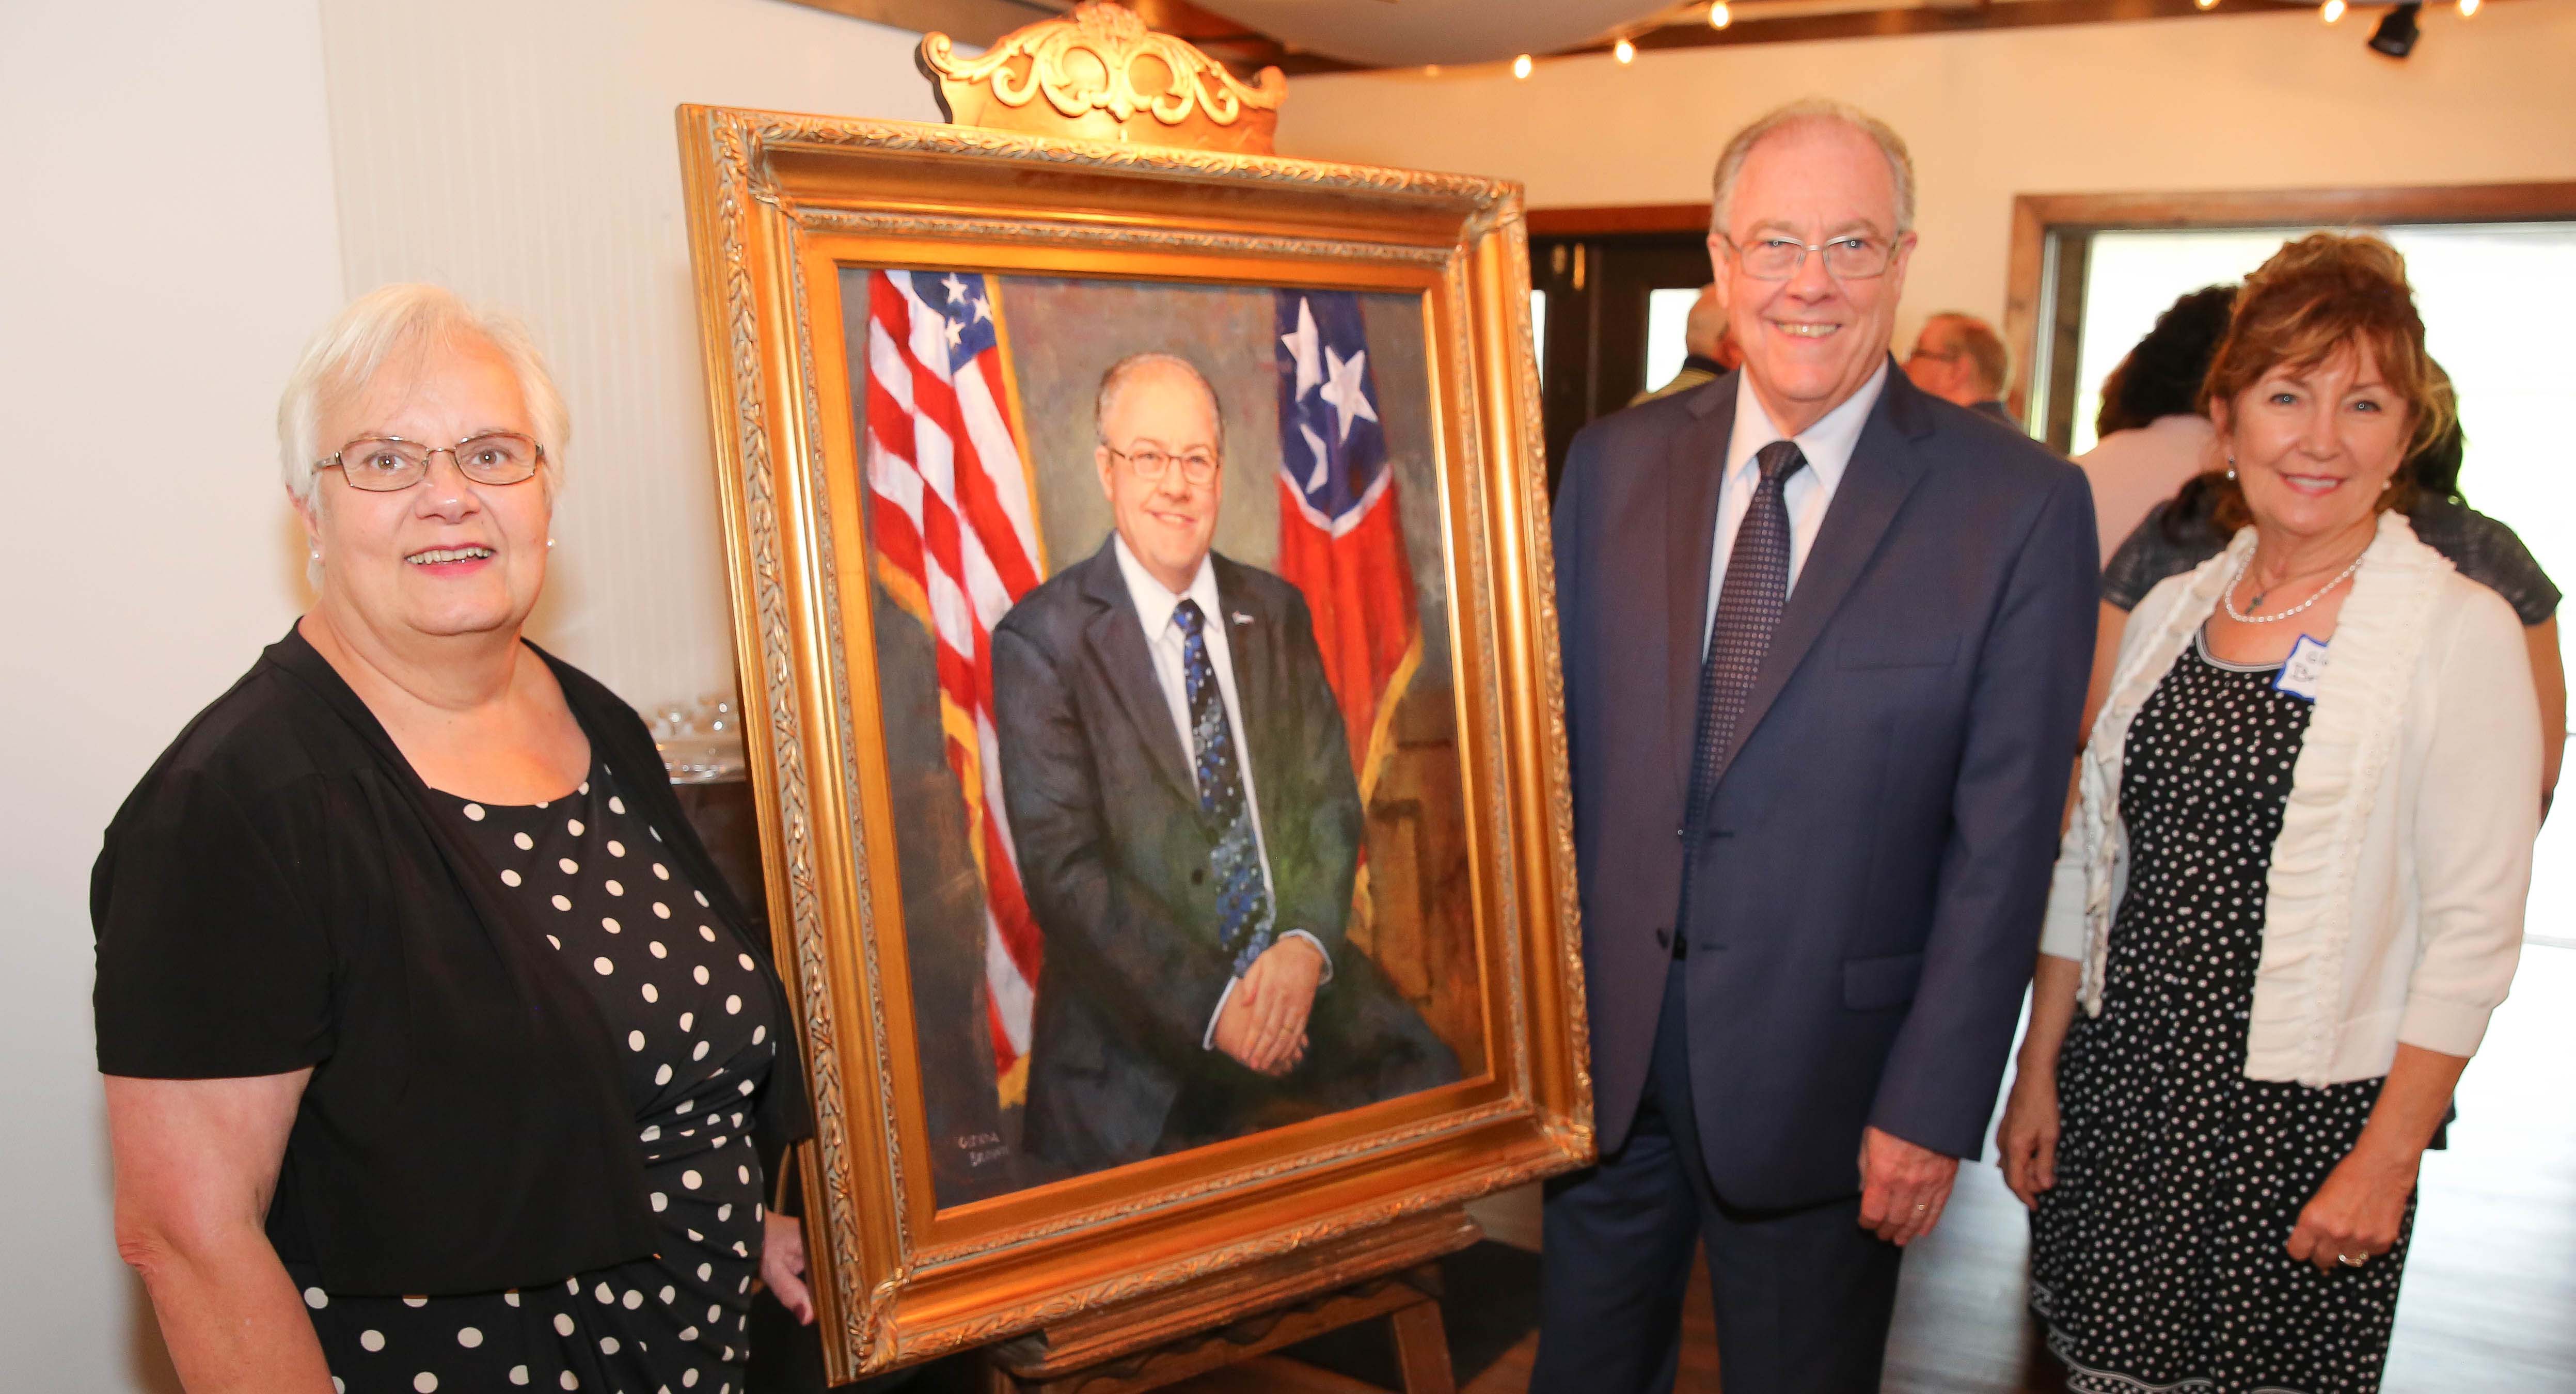 Wanda Faulkner and Jerry Faulkner pose with his portrait, painted by Glenda Shaw Brown (right).